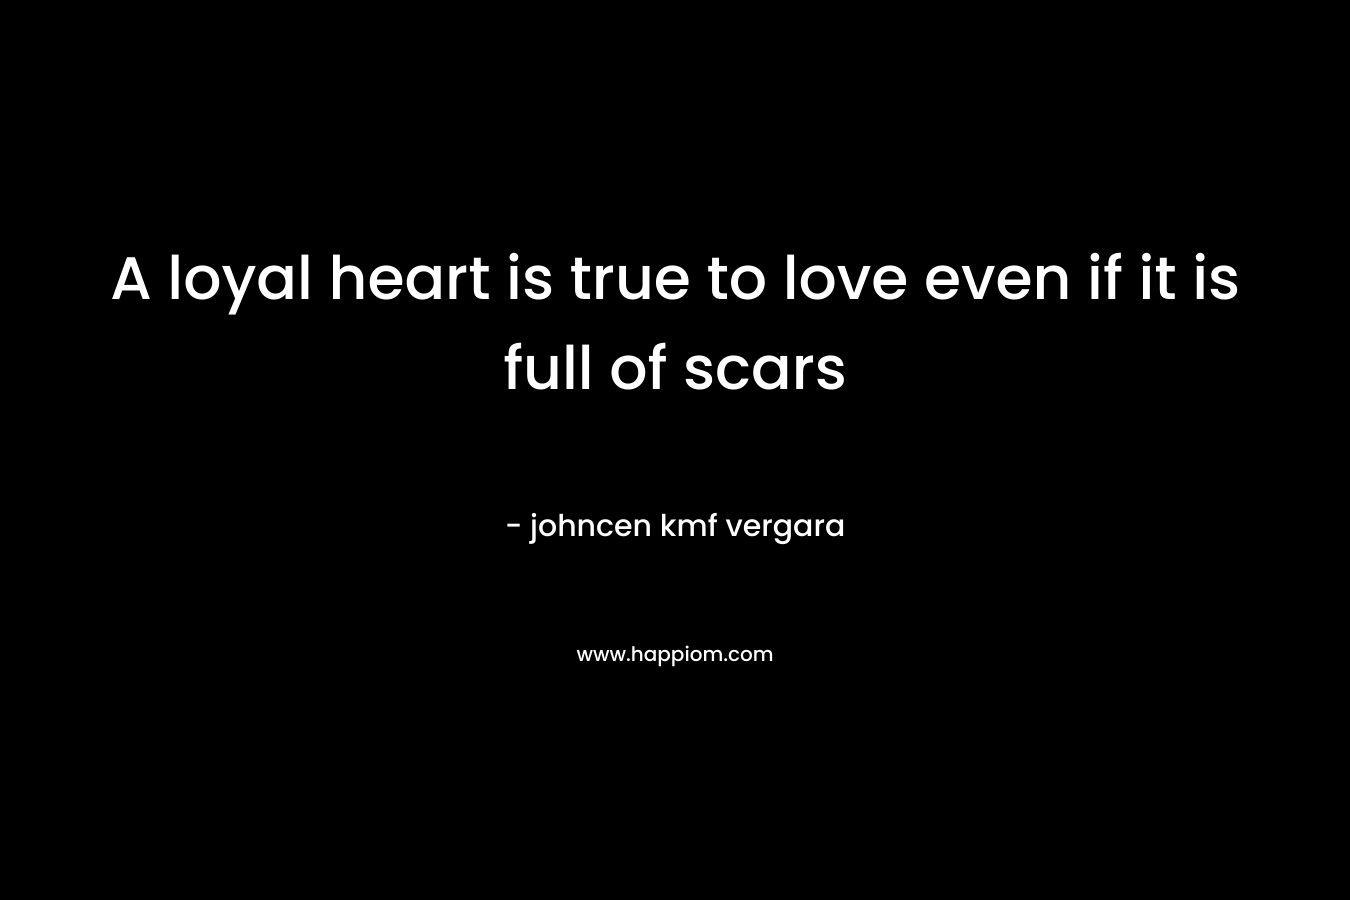 A loyal heart is true to love even if it is full of scars